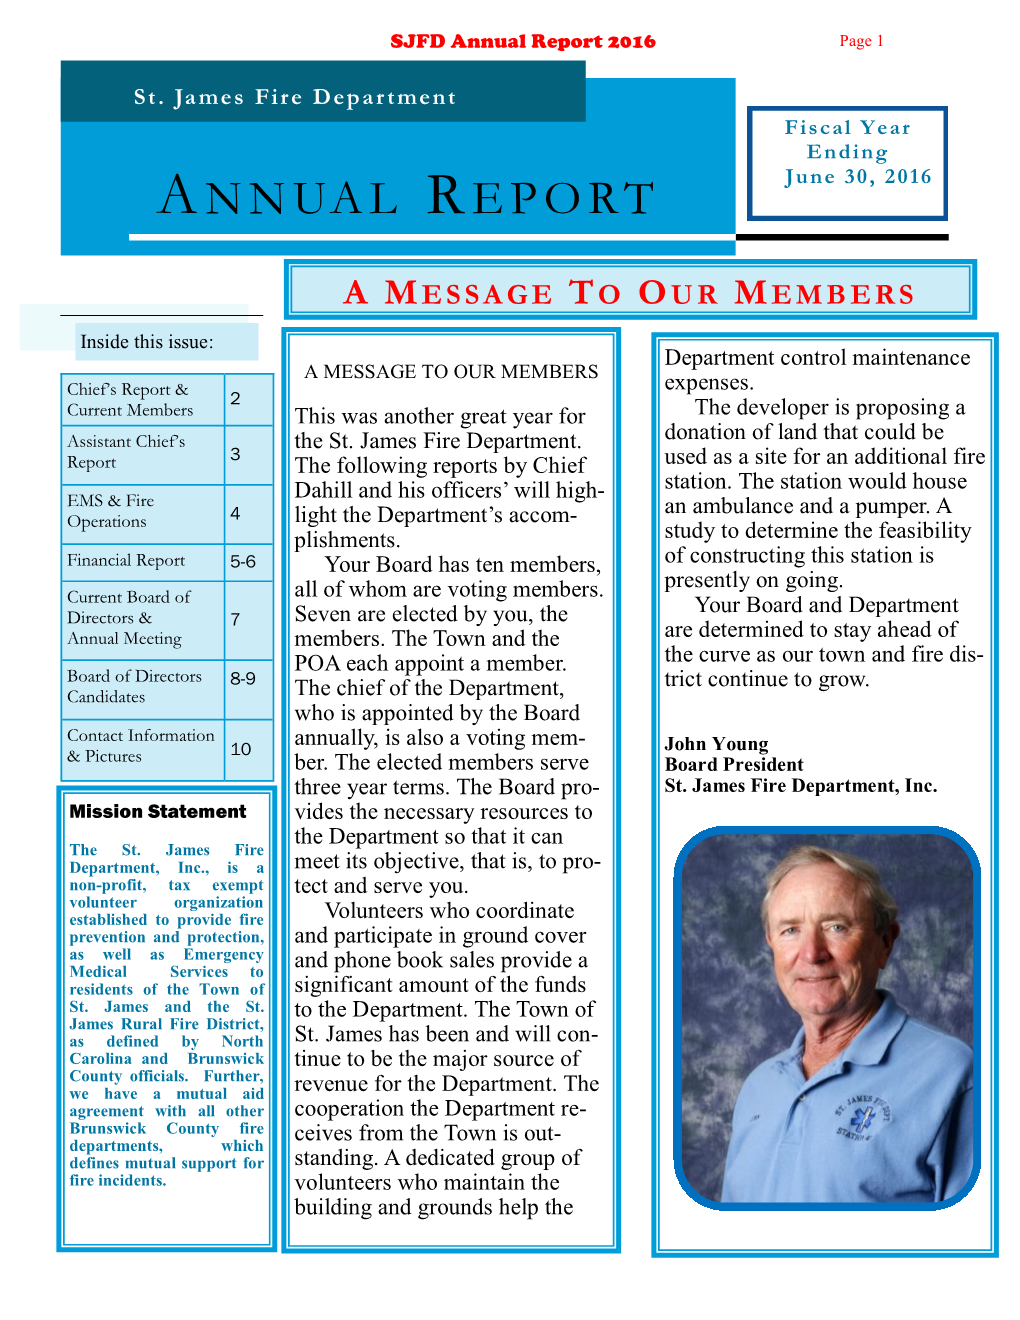 Annual Report 2016 Page 1